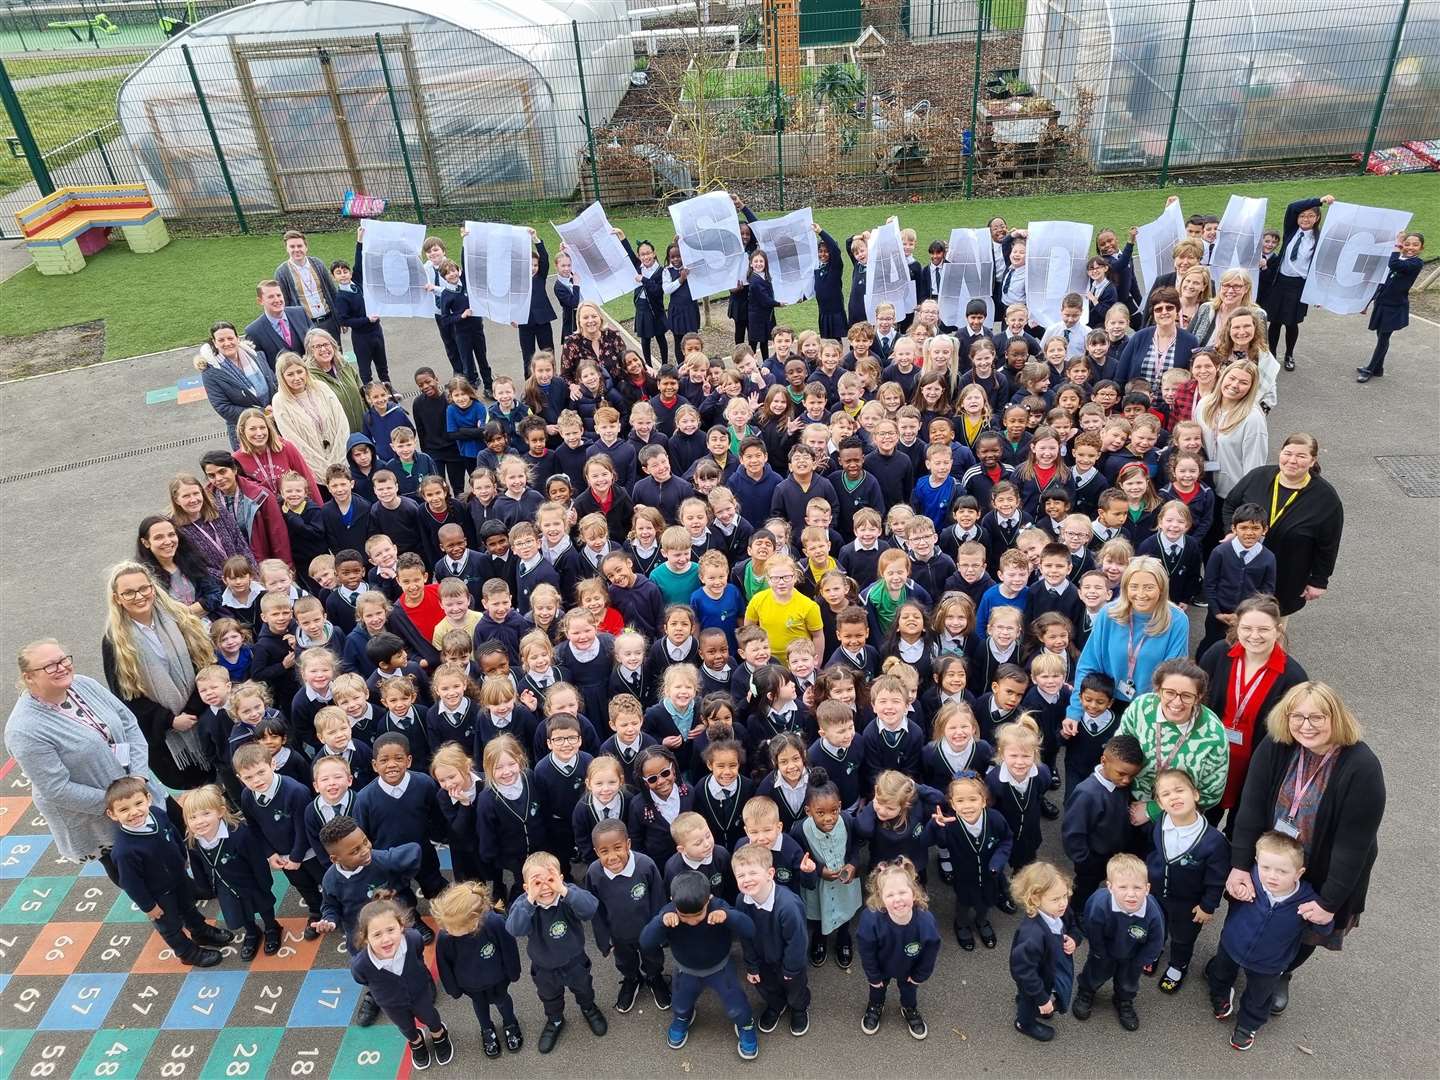 Bearsted Primary Academy was rated outstanding in by Ofsted. Picture: Bearsted Primary Academy